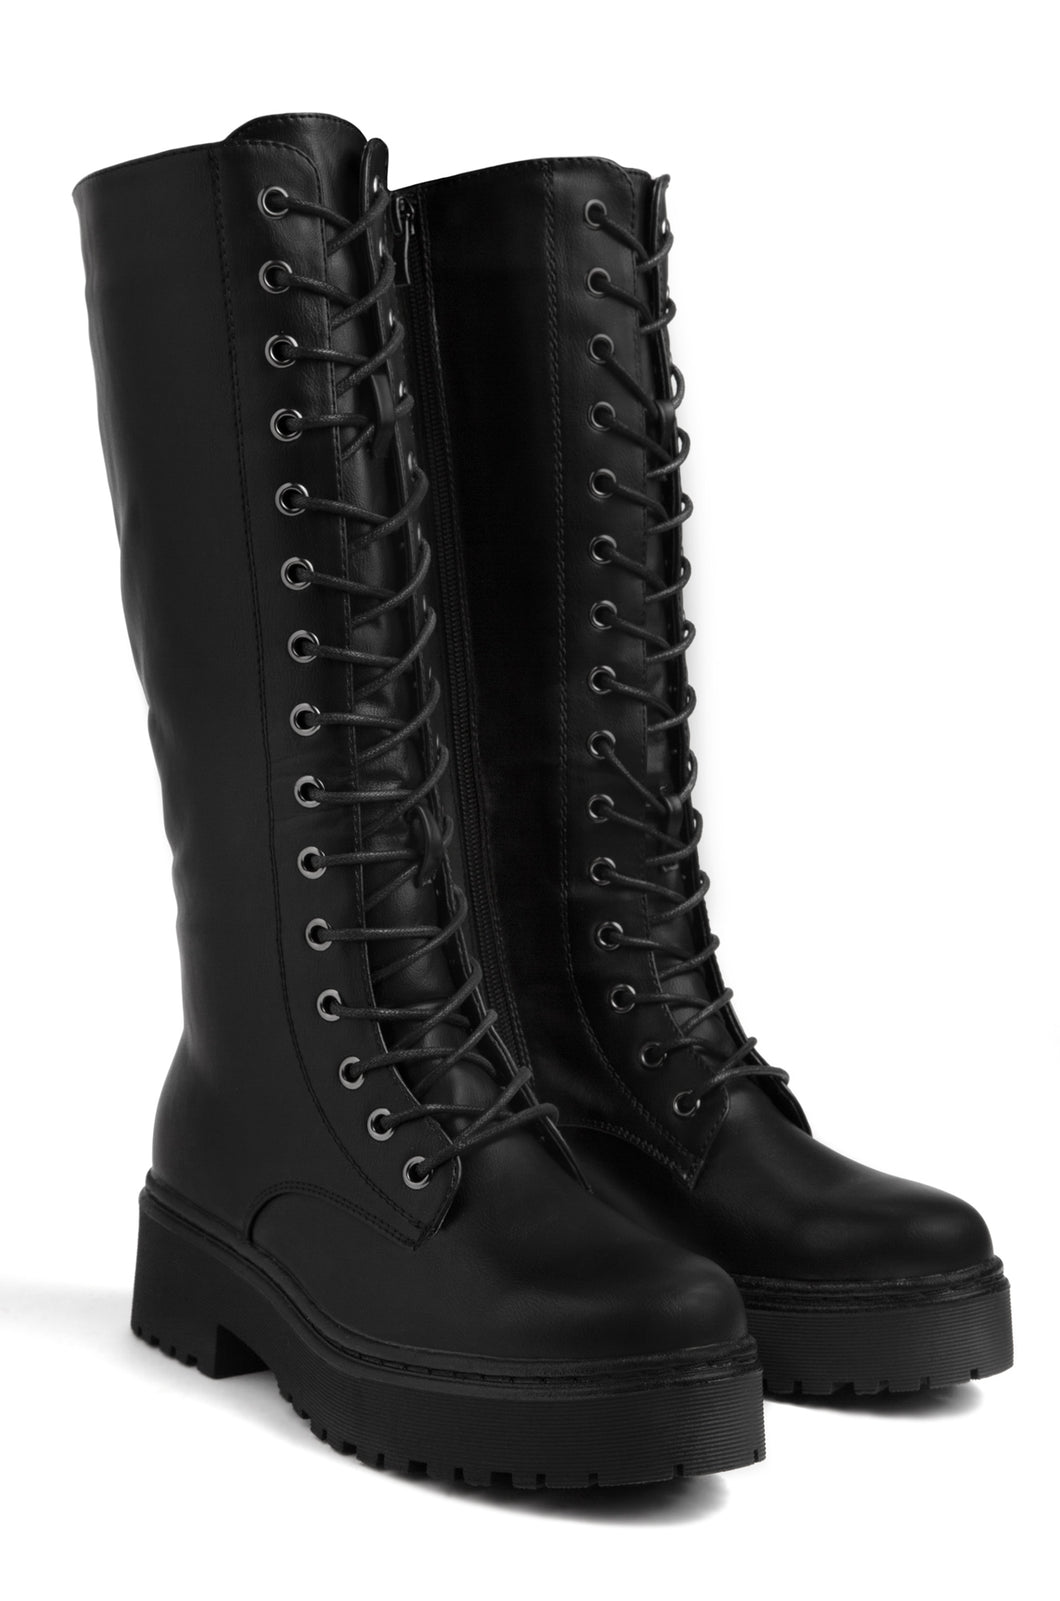 black lace up fax leather boot 